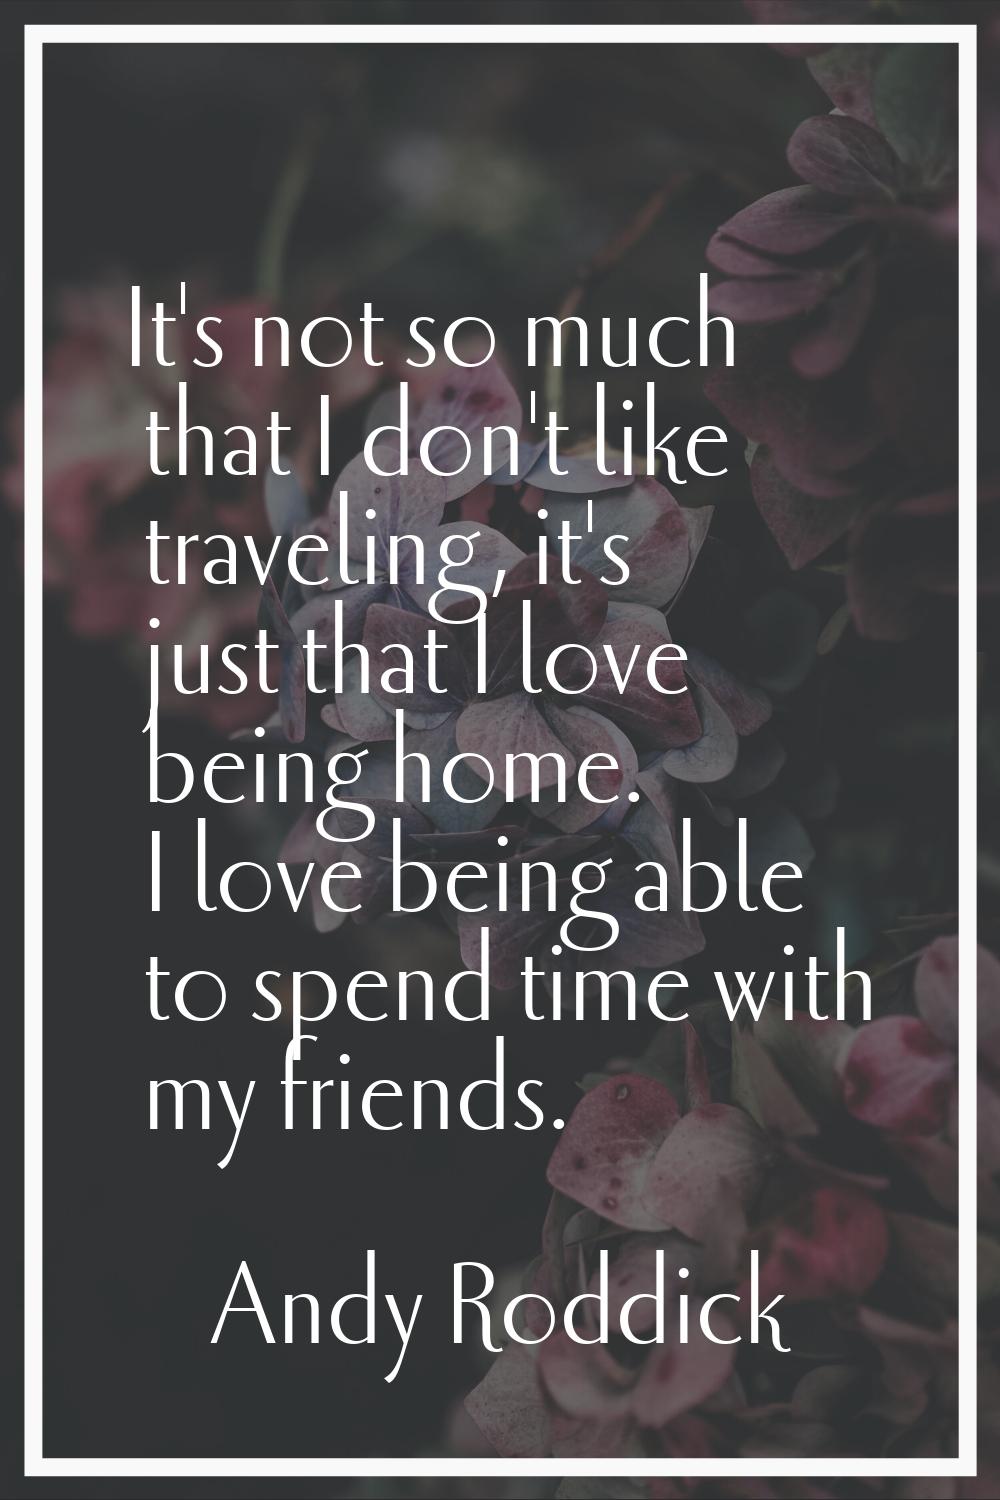 It's not so much that I don't like traveling, it's just that I love being home. I love being able t